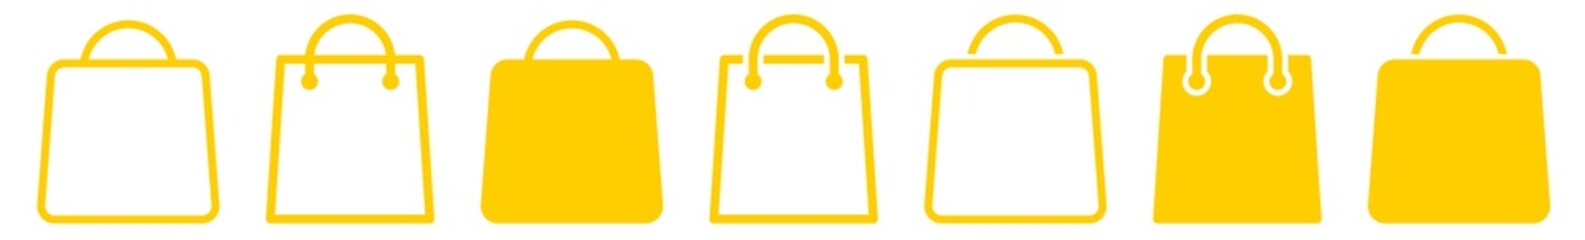 Shopping Bag Icon Yellow | Paper Bags Illustration | Online Shop Symbol | E-Commerce Logo | Commerce Sign | Isolated | Variations